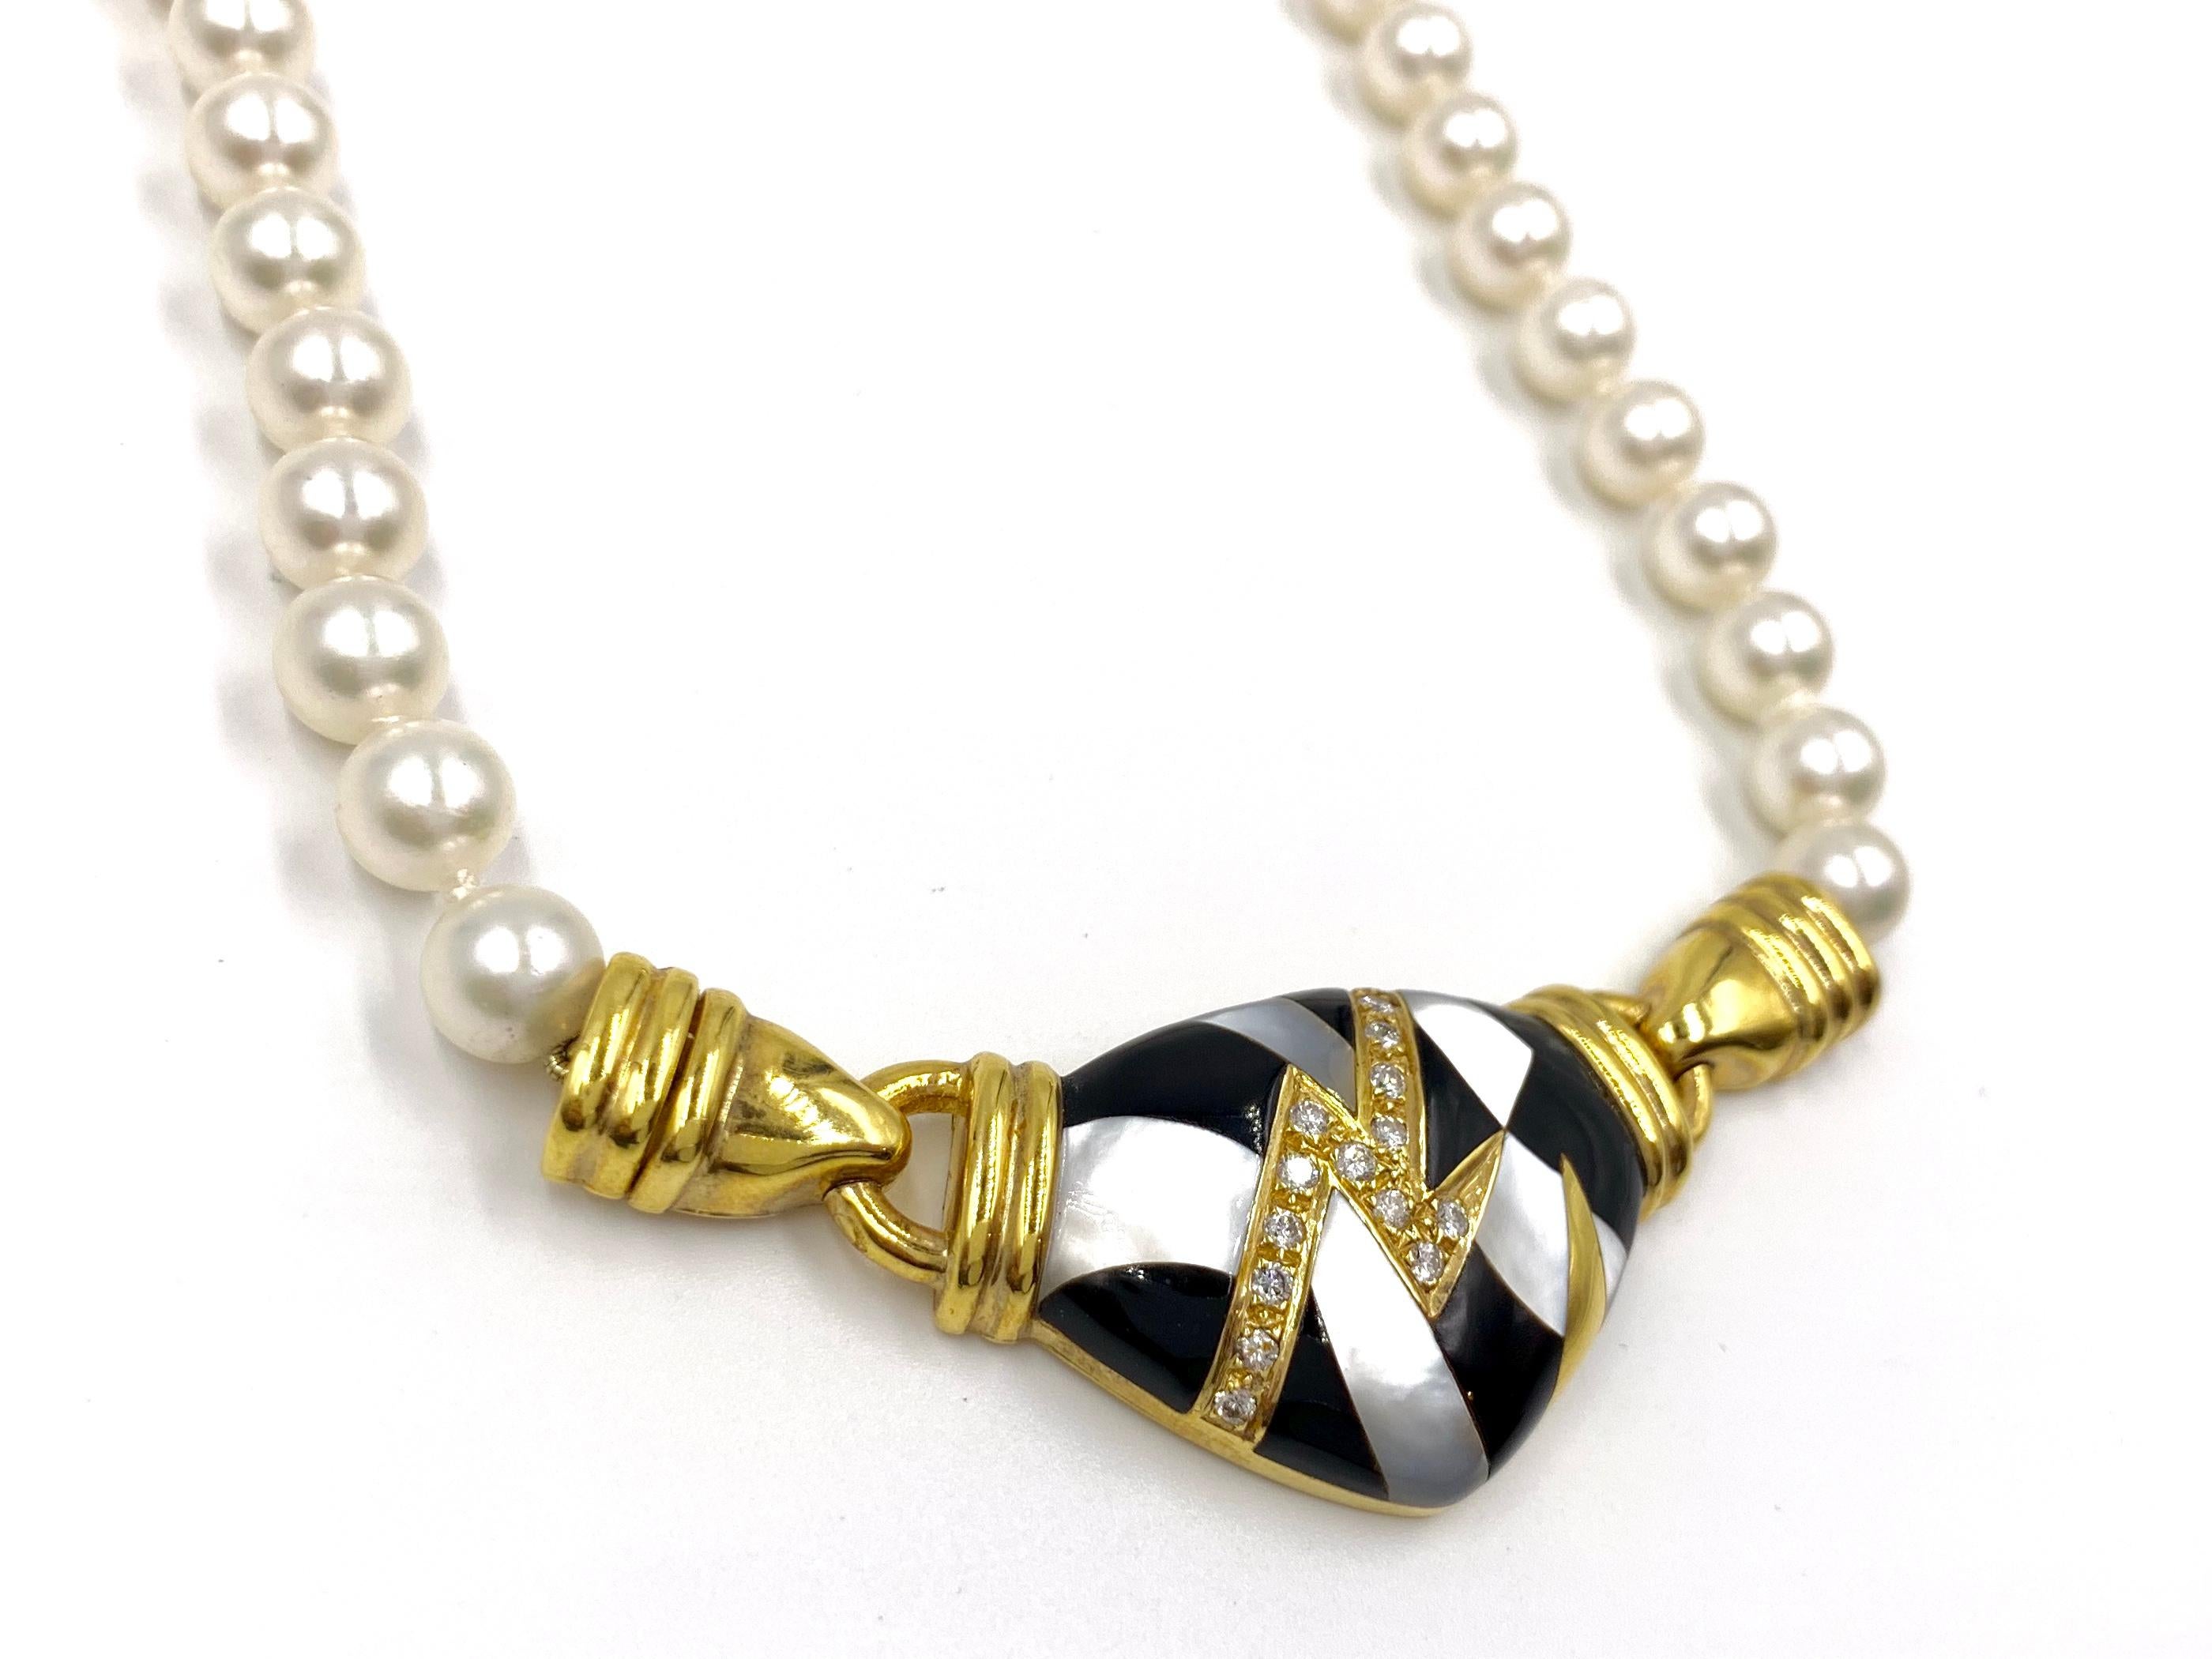 Modern 18 Karat Pearl Necklace with Diamond and Inlaid Stone Center For Sale